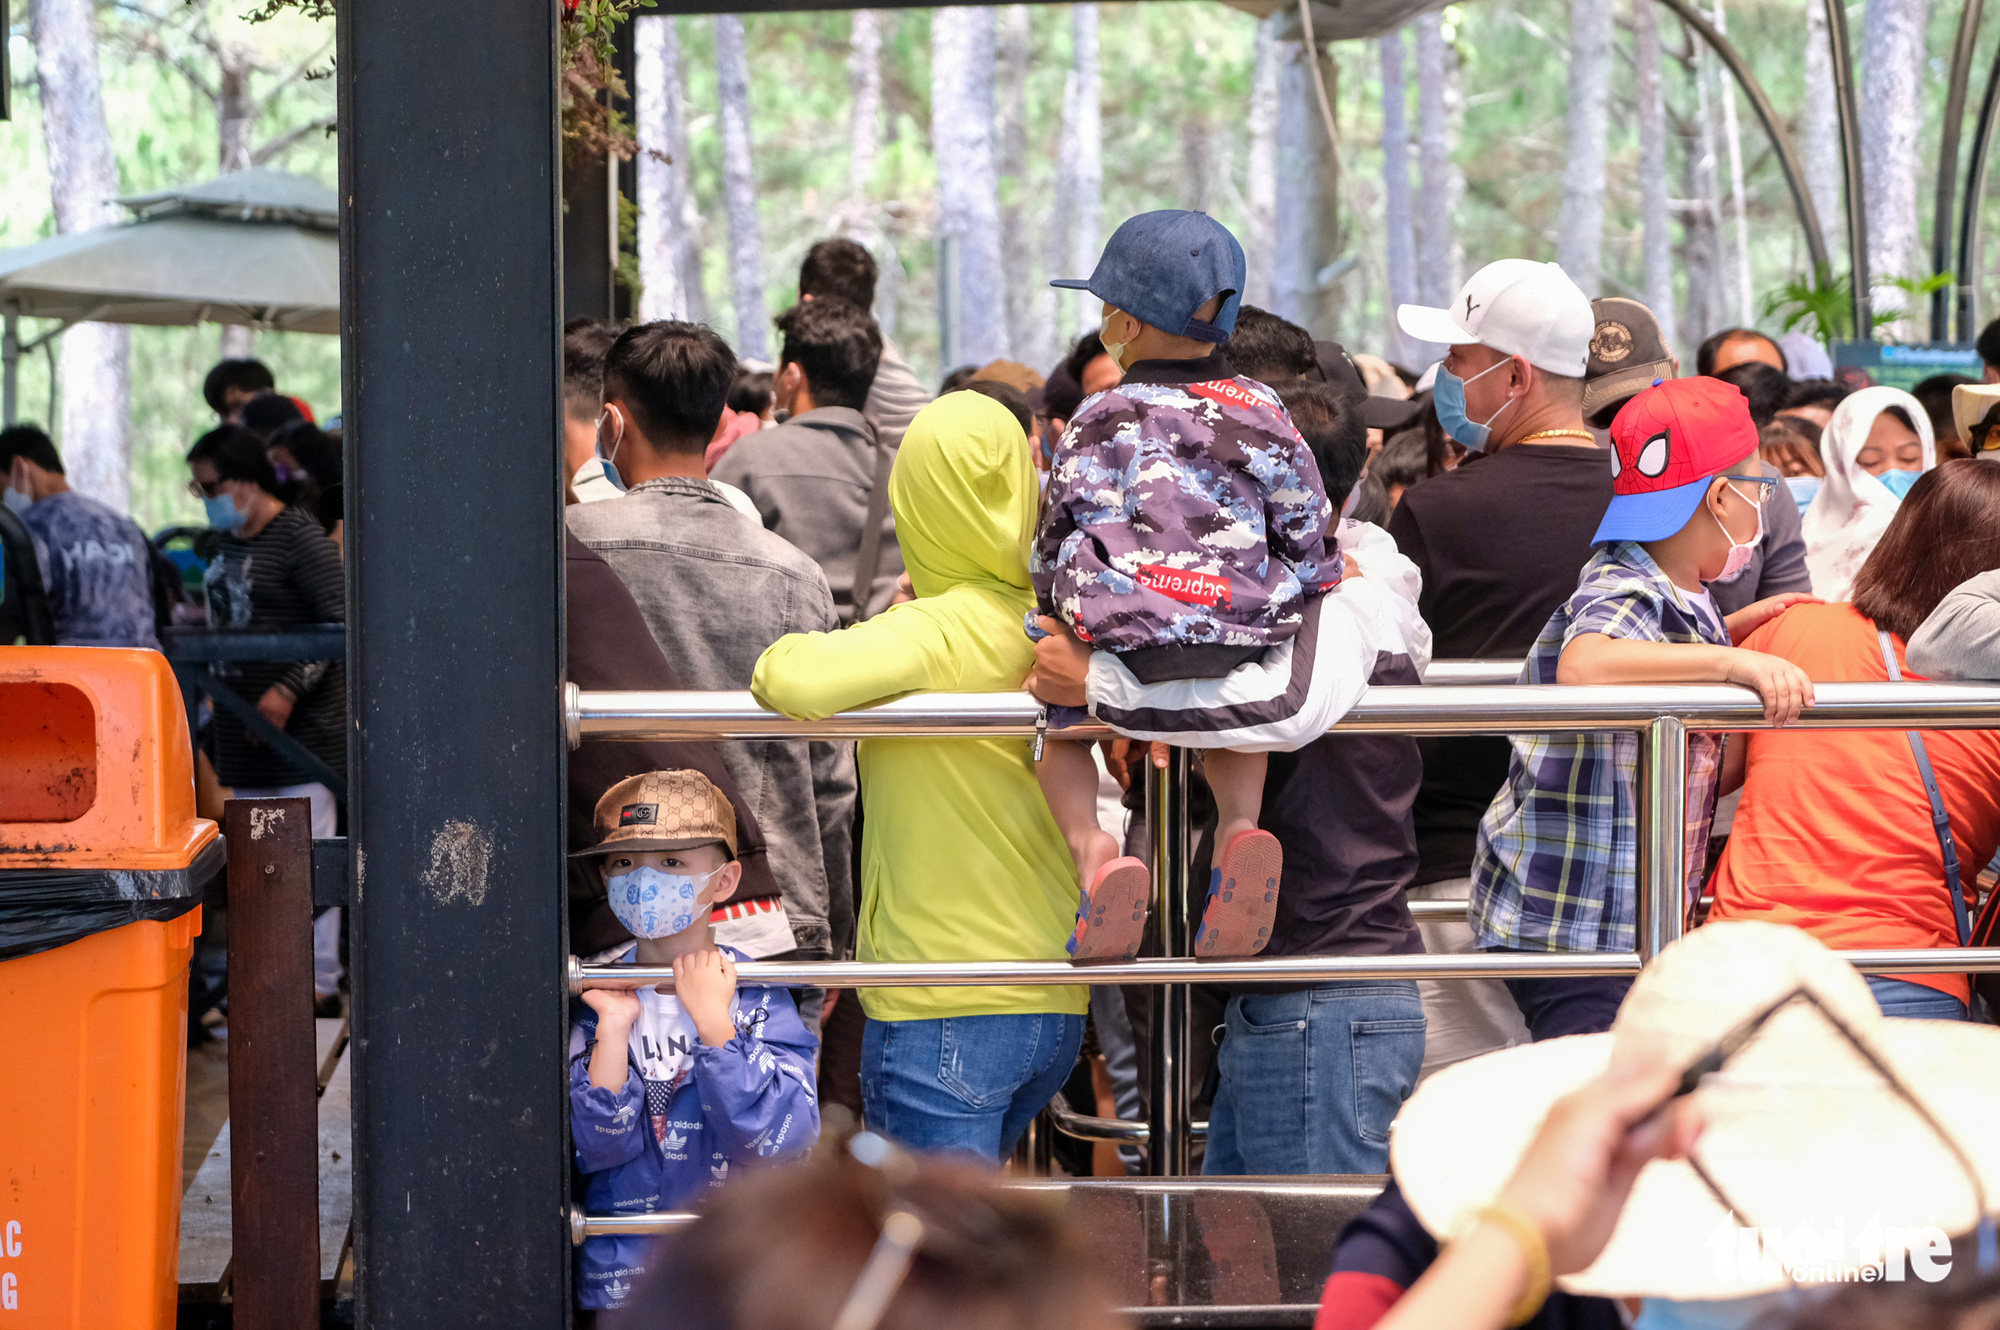 People wait to buy tickets at the entrance of Datanla Waterfall in Da Lat City, Lam Dong Province, Vietnam, May 2, 2021. Photo: Duc Tho / Tuoi Tre